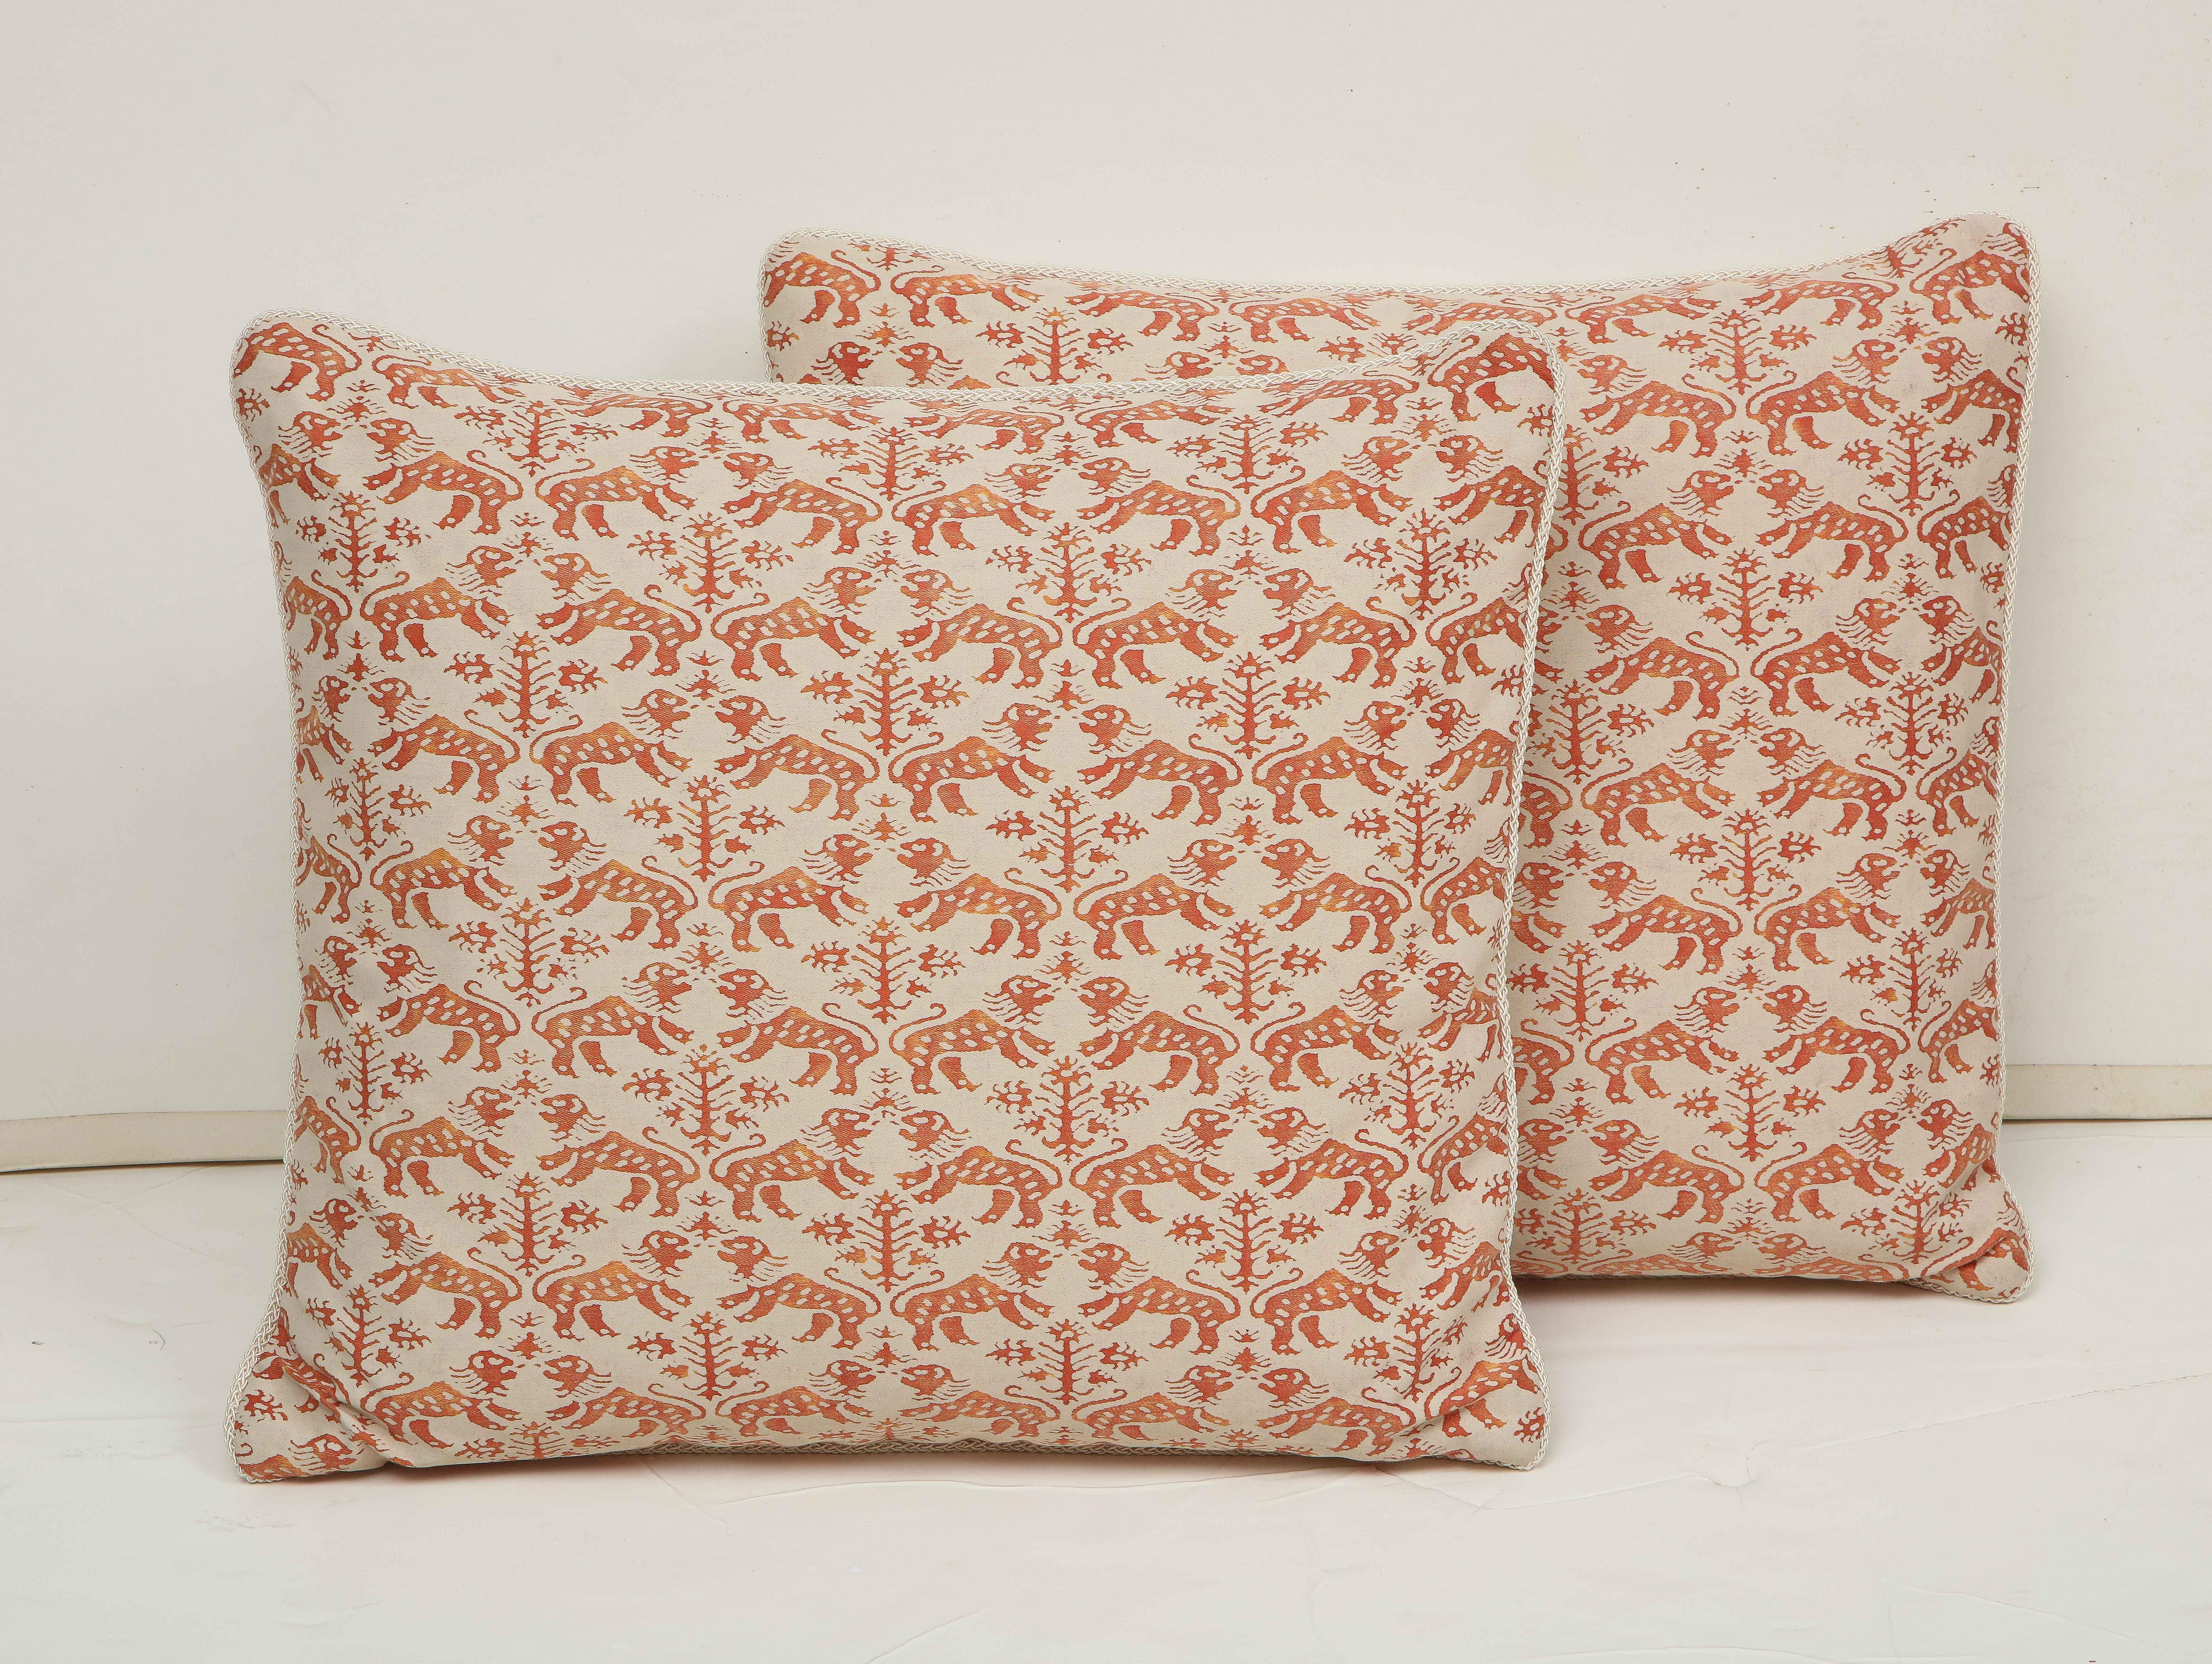 Pair of pillows covered in orange and cream Fortuny silk and backed in natural linen. Individually priced at $475.